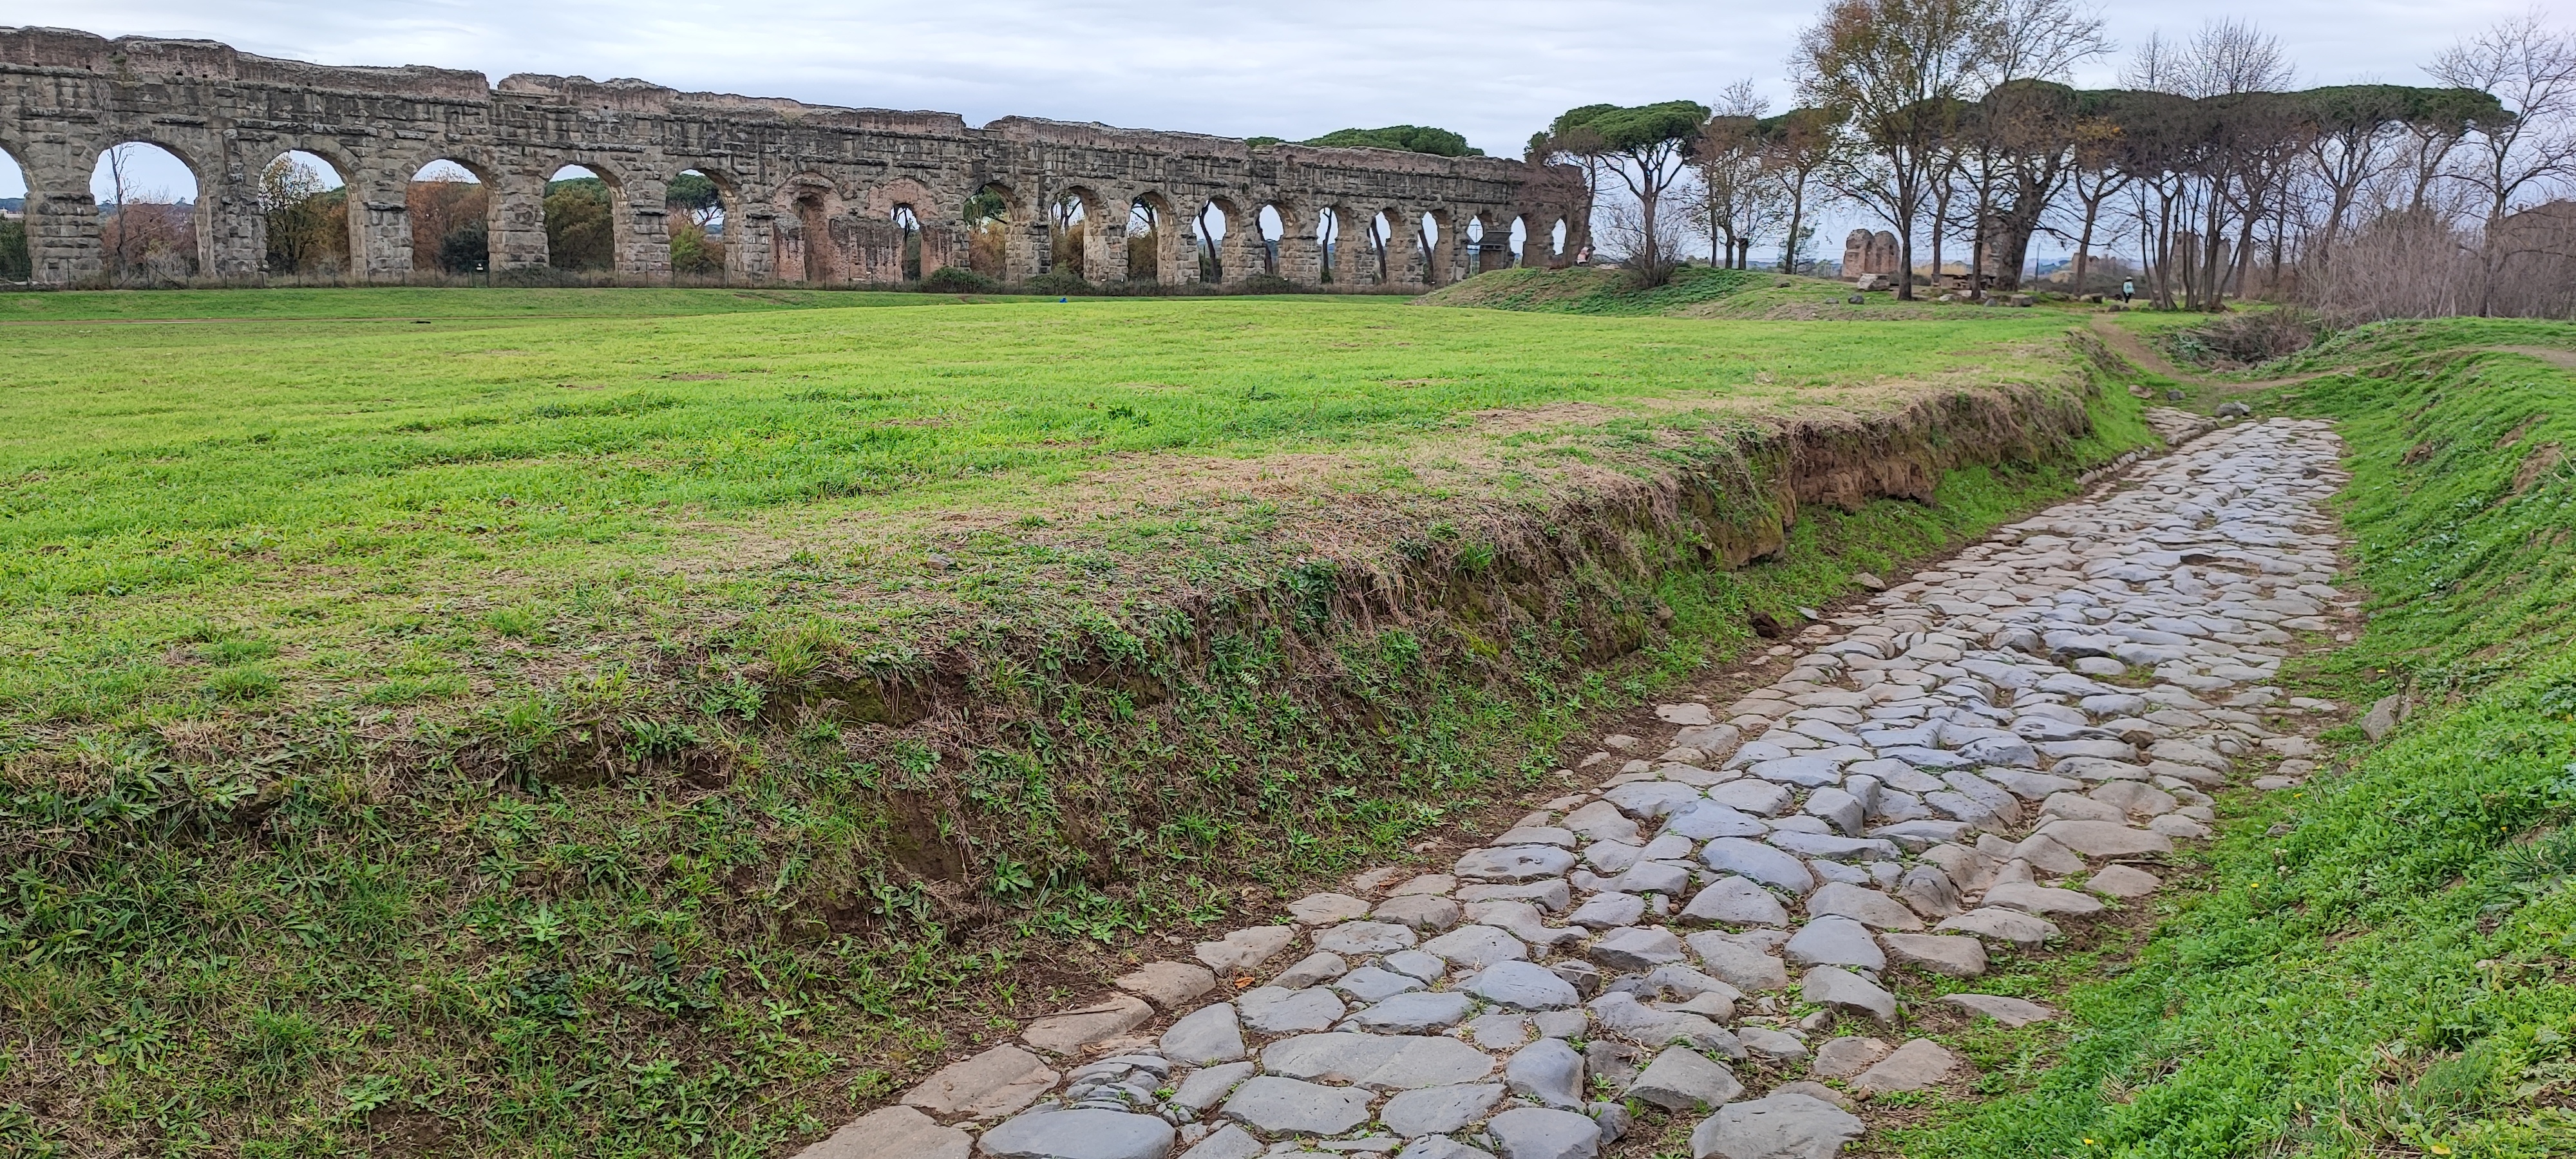 Another viewpoint of the Park of the Aqueducts. This is an original ancient Roman road.